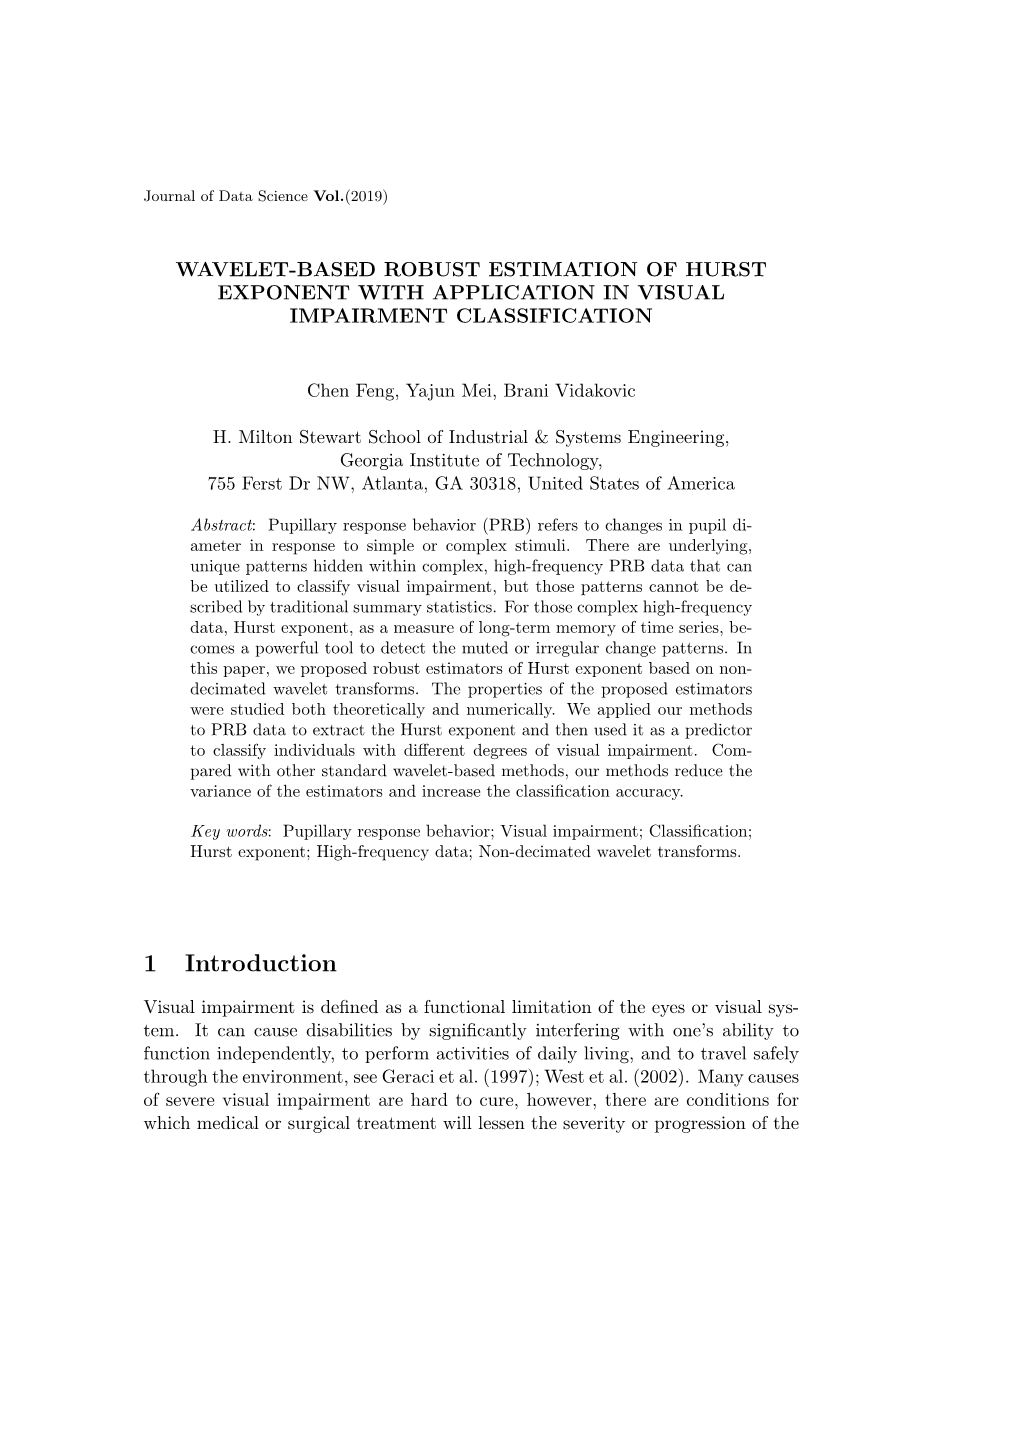 Wavelet-Based Robust Estimation of Hurst Exponent with Application in Visual Impairment Classification